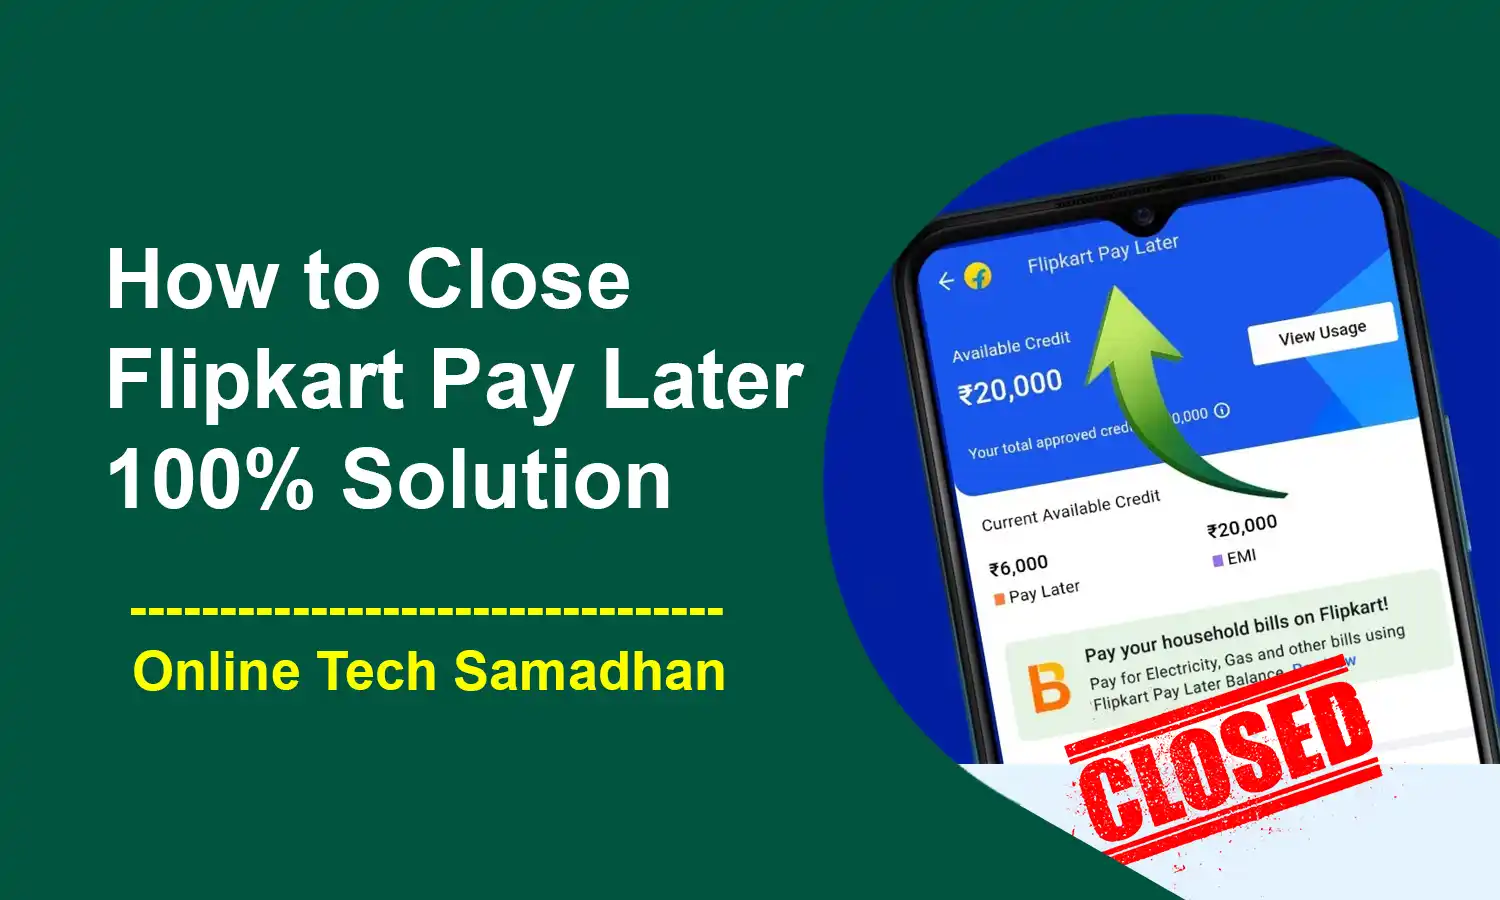 How to Close Your Flipkart Pay Later Account